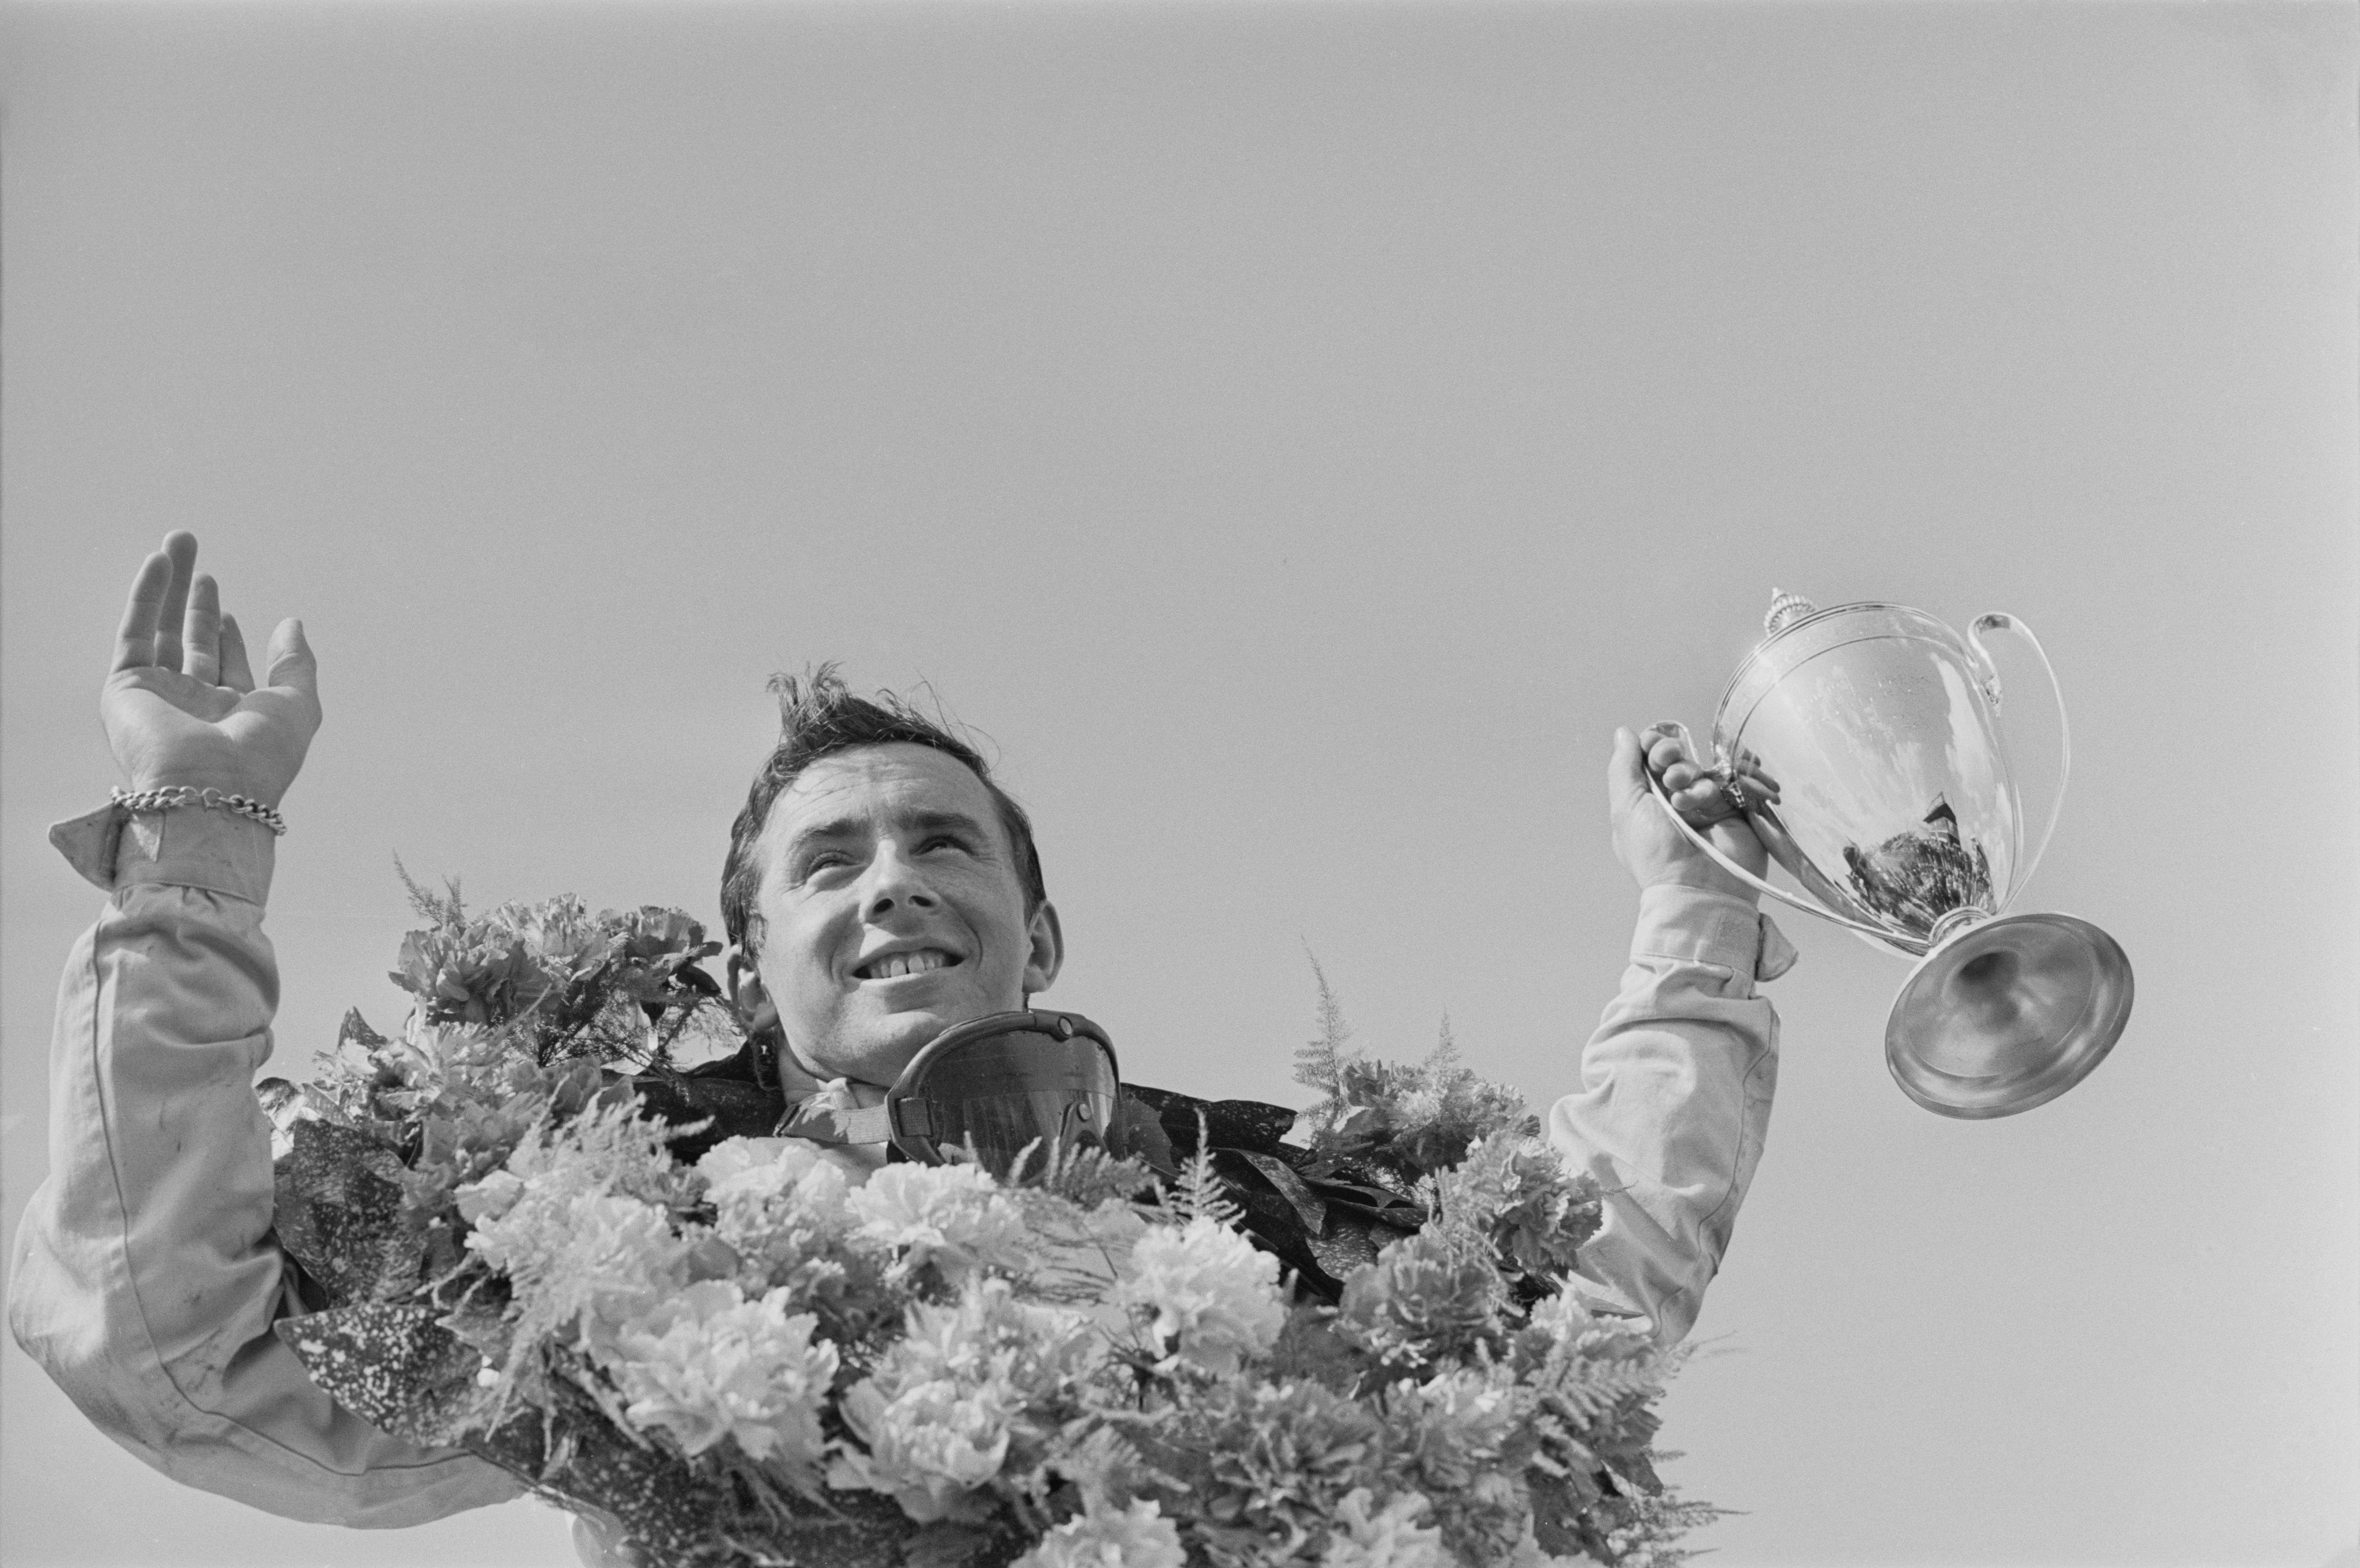 Jackie Stewart after a victory at Silverstone in 1965